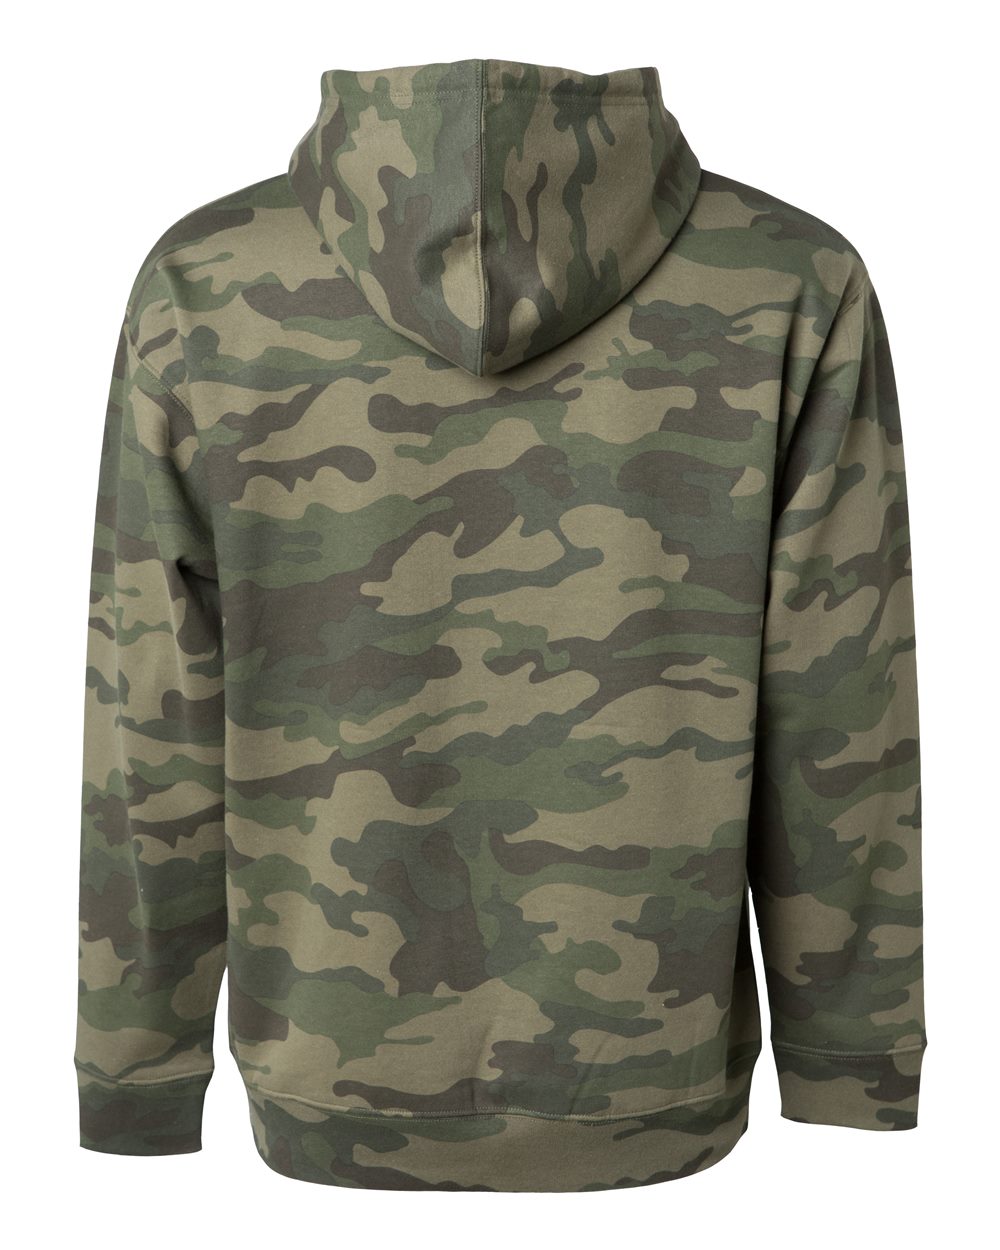 Independent Trading Co. Midweight Hooded Sweatshirt SS4500 #color_Forest Camo